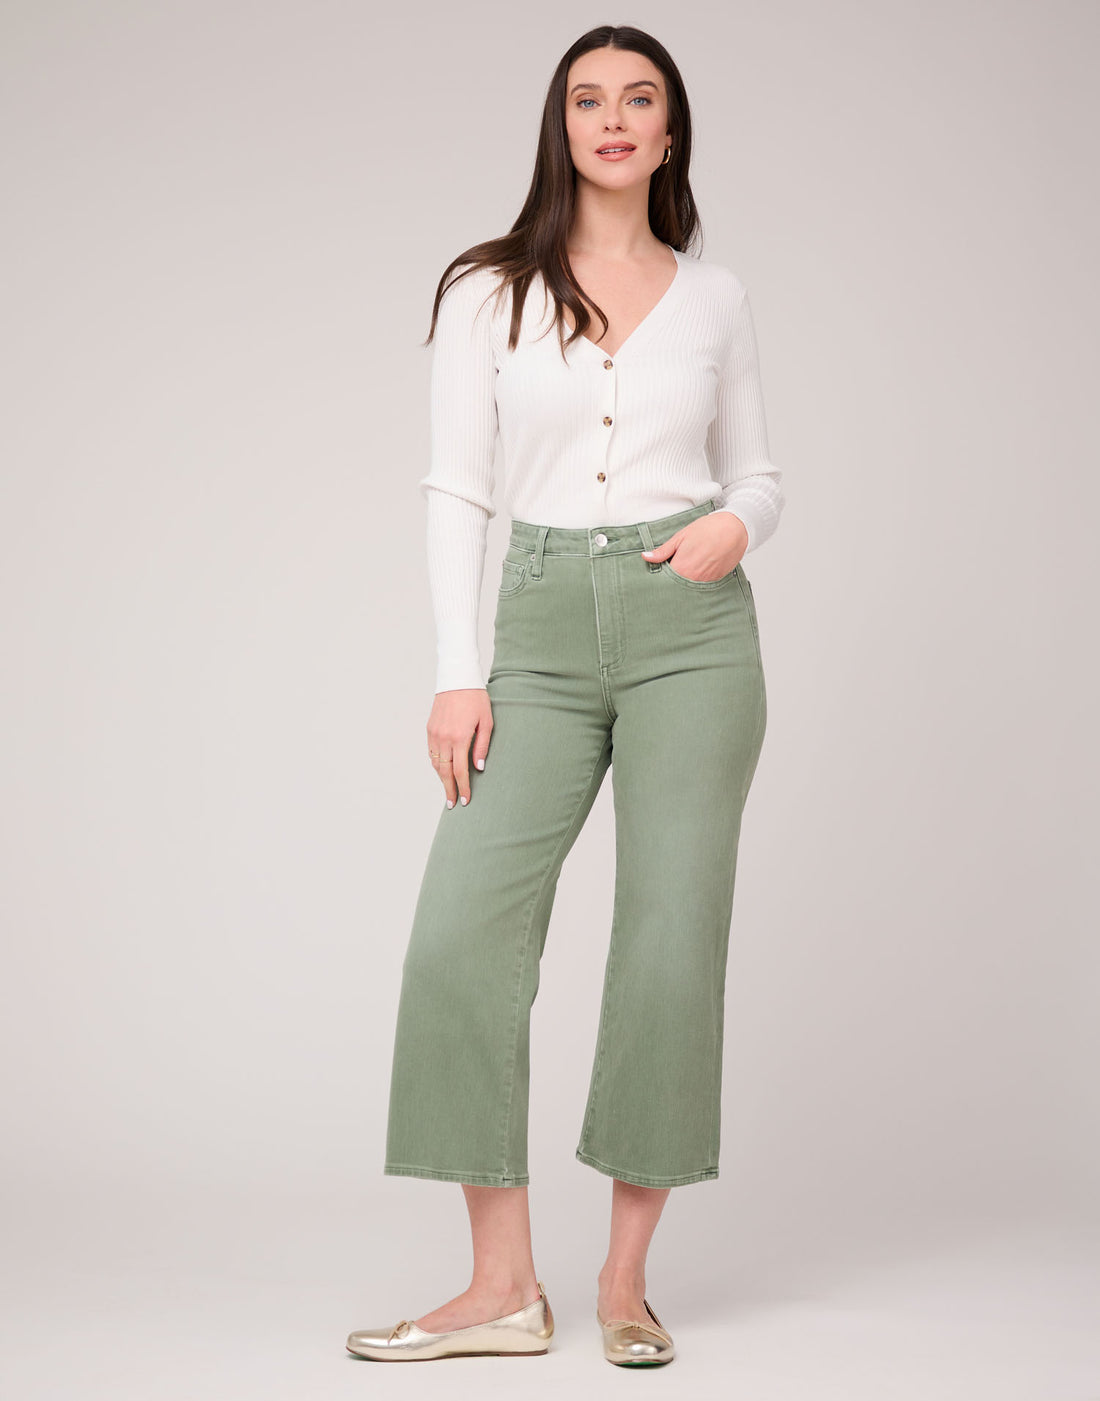 Jeans Lily 2538 Beach Grass Yoga Jeans